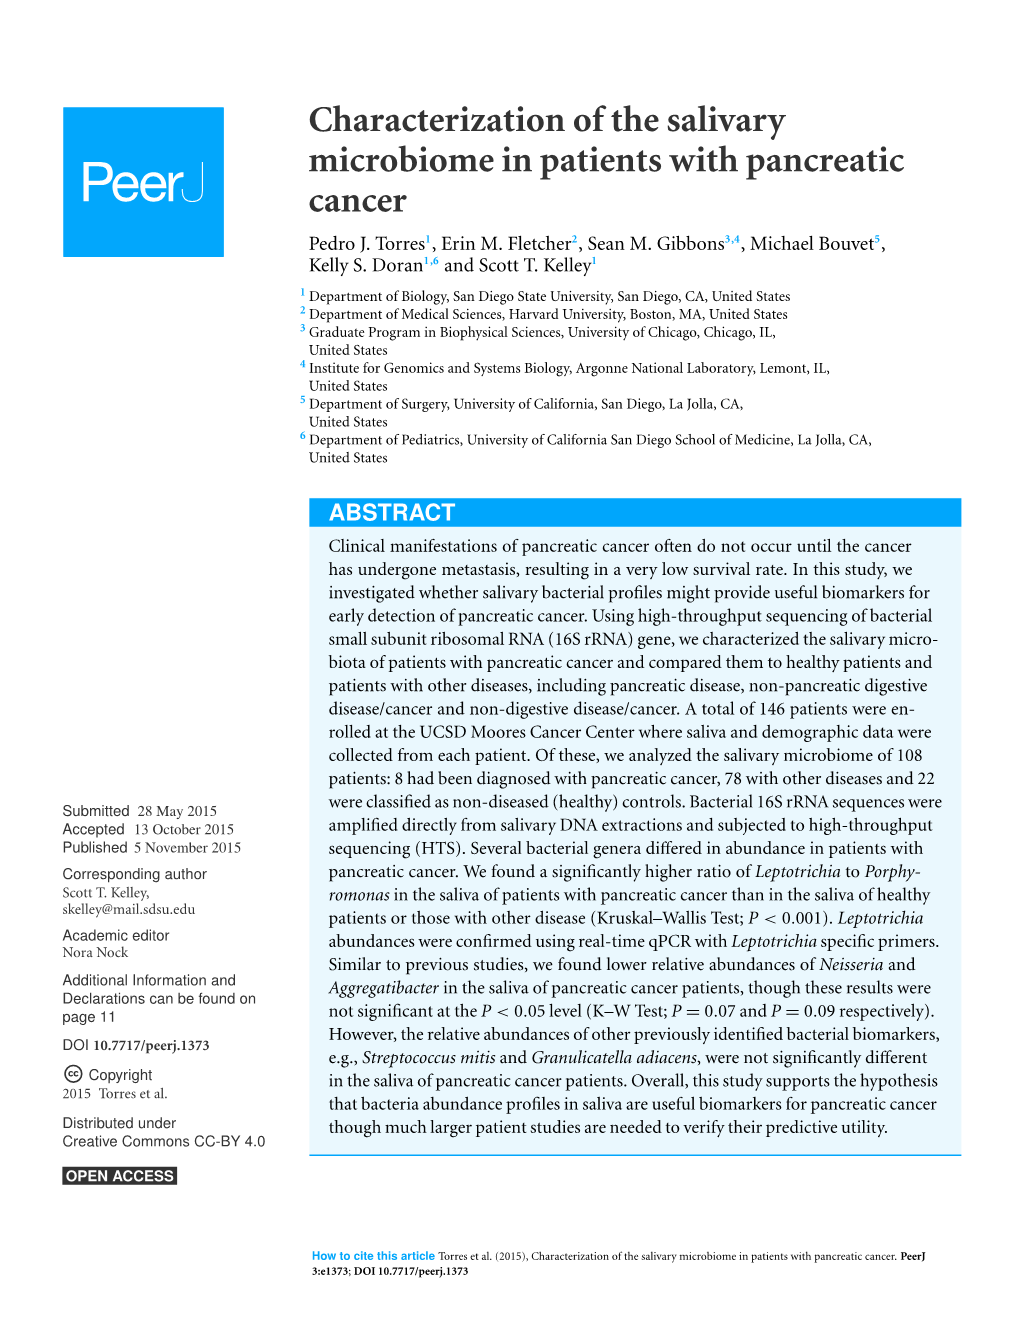 Characterization of the Salivary Microbiome in Patients with Pancreatic Cancer Pedro J